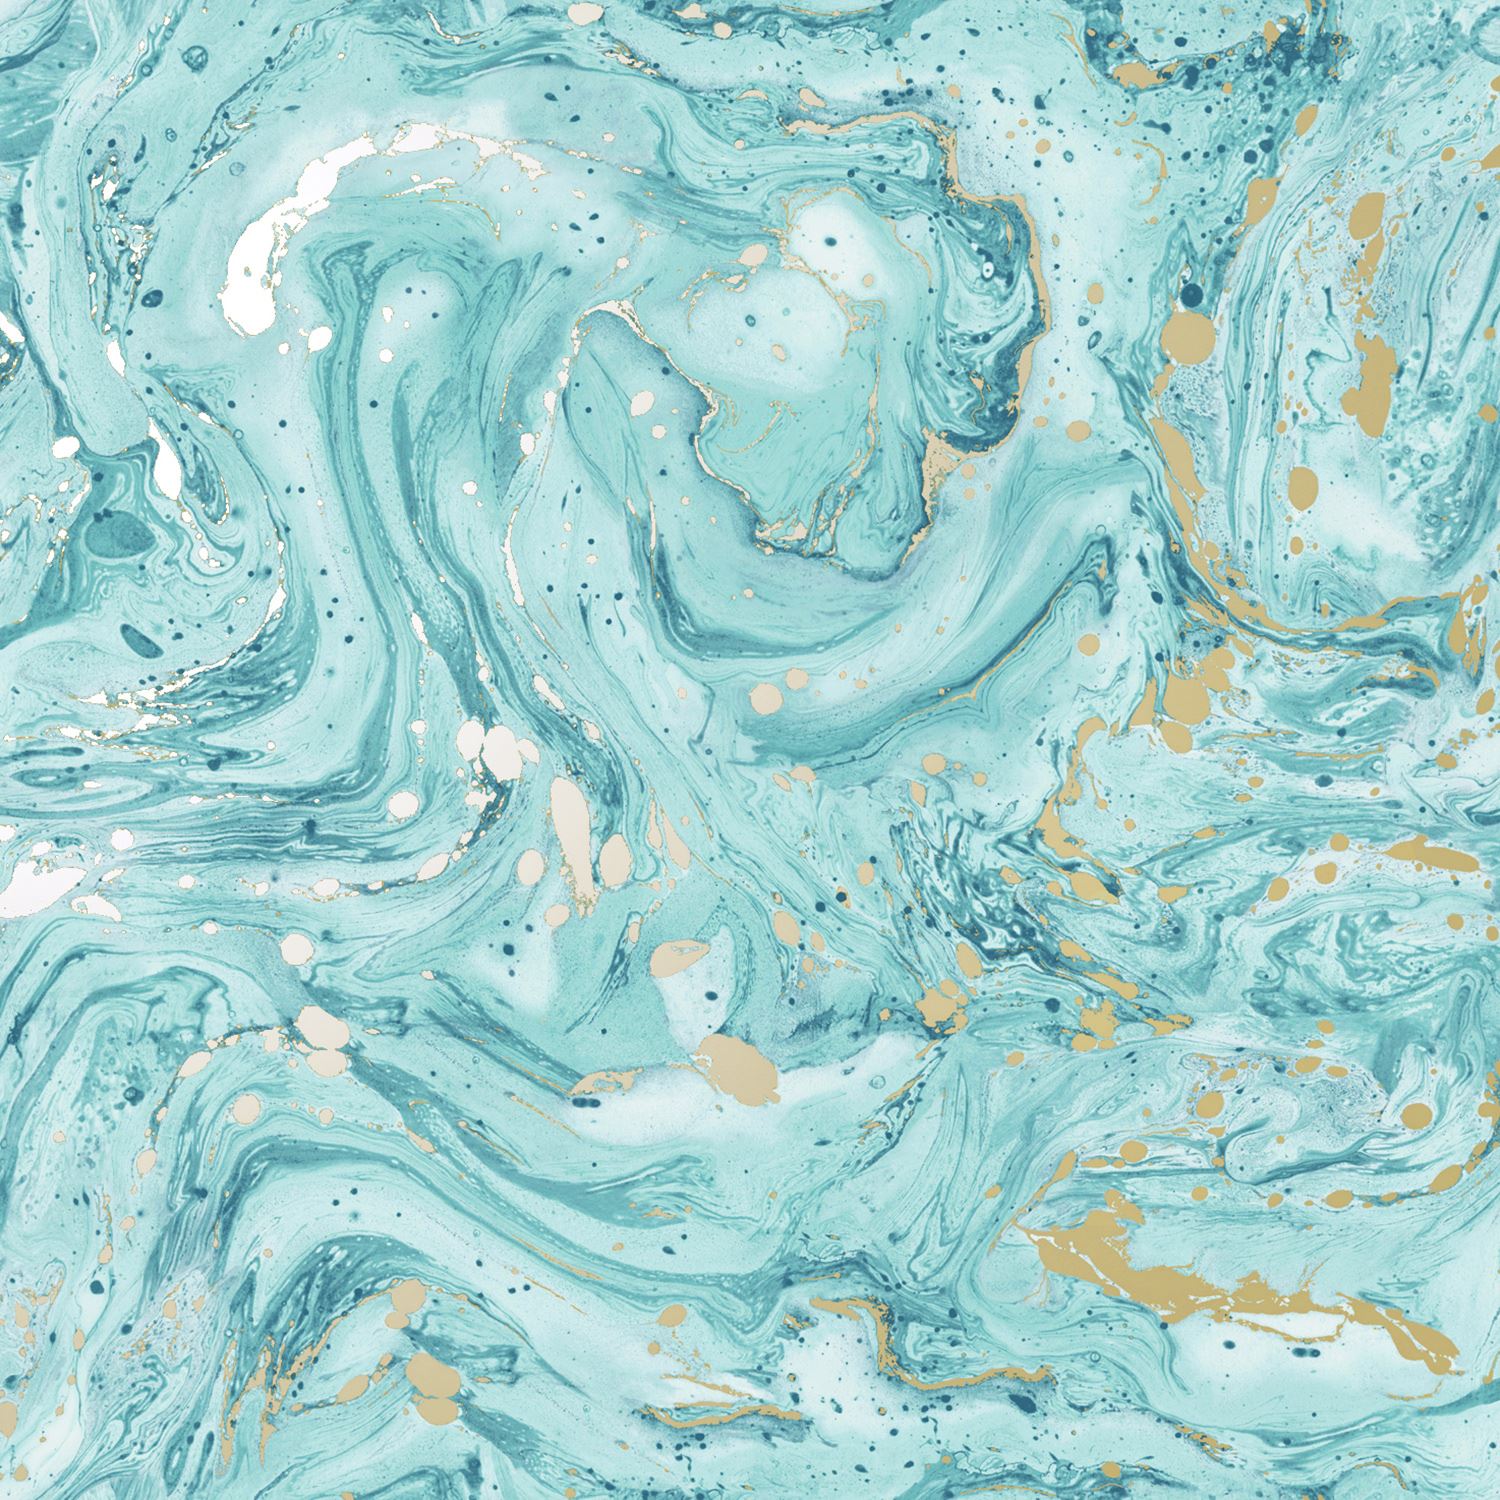 teal and gold wallpaper,aqua,blue,turquoise,water,pattern